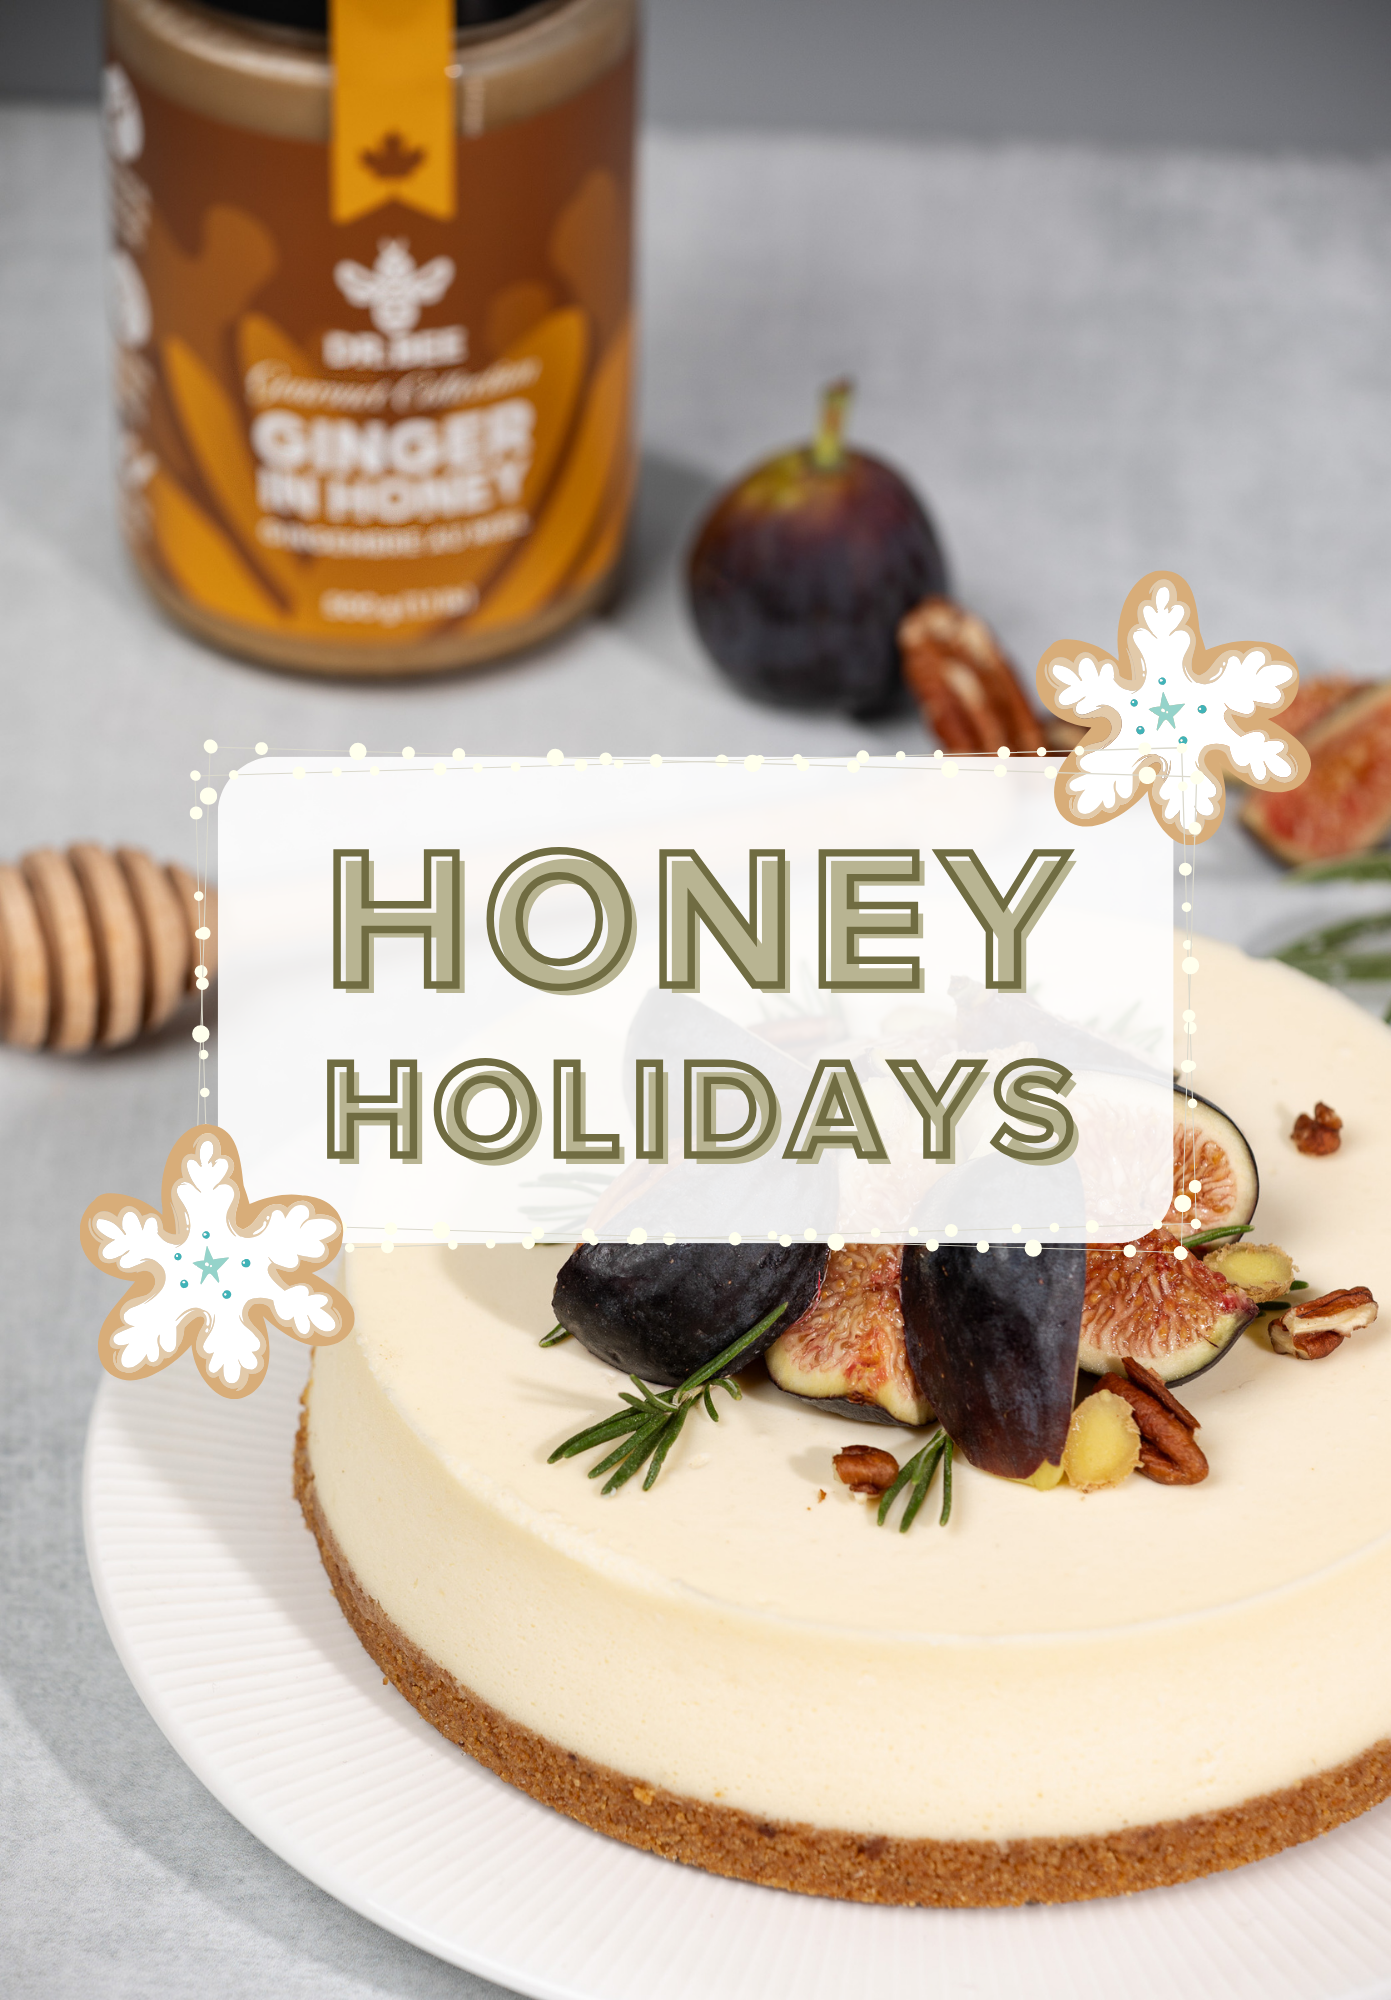 How to Cook or Bake with Honey During the Holiday Season